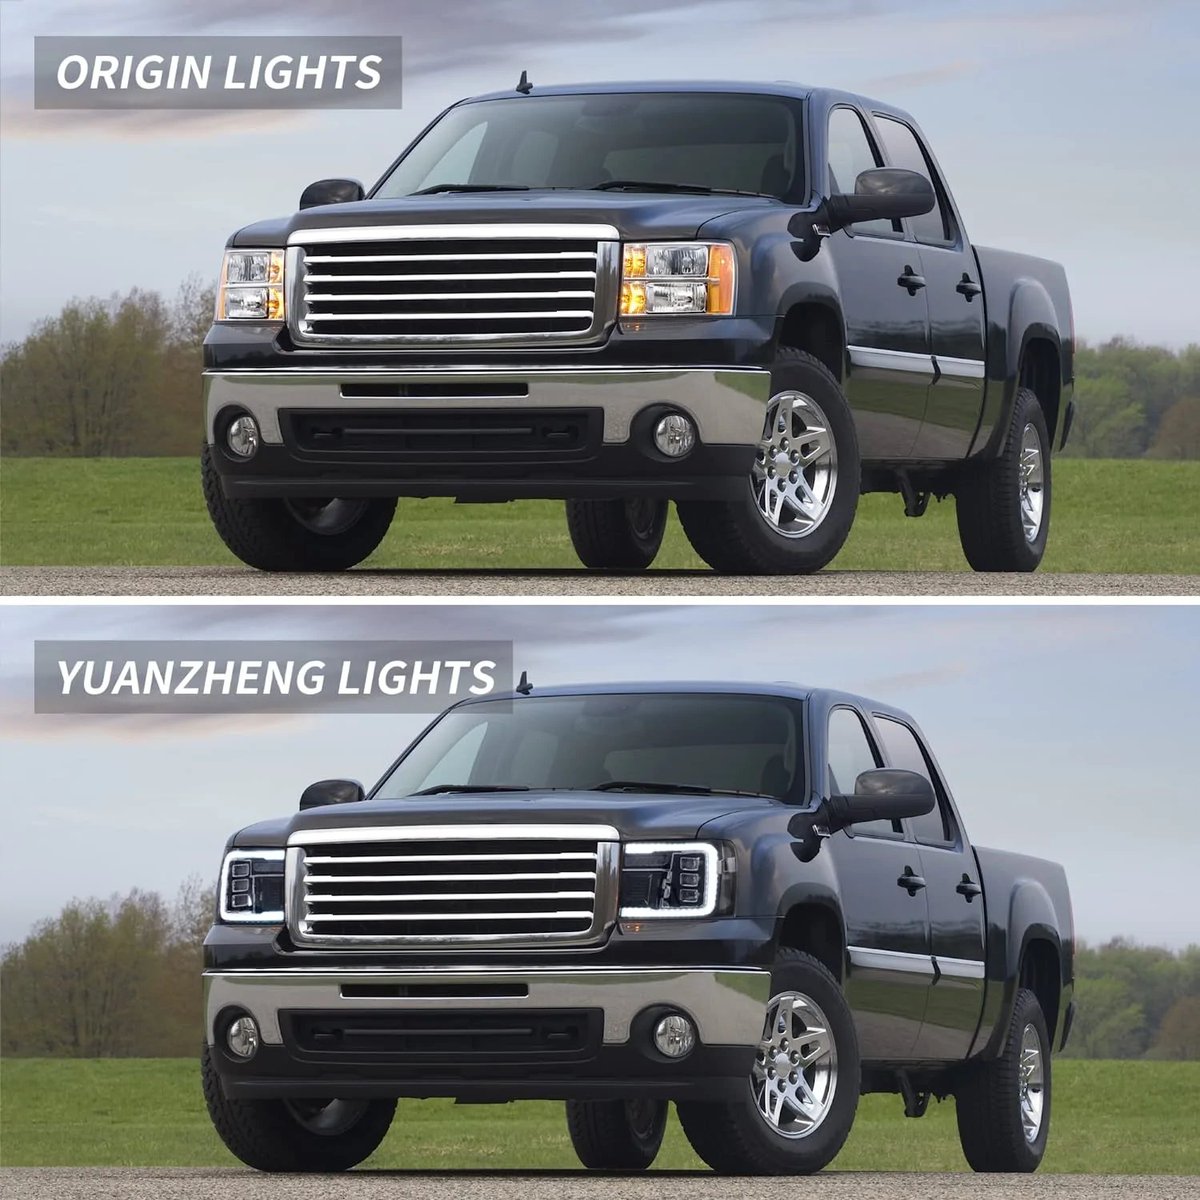 VLAND LED Projector Headlights For GMC Sierra 1500 2500HD 3500HD 2007-2013 🔥🔥

Start up with dynamic animation. Full LED is designed to fully upgrade your car. 👏

Link to headlight: vland-official.com/products/vland…
-
-
#GMCSierraEV #gmcsierra #GMC #Sierra #trucks  #gmctruck #offroad